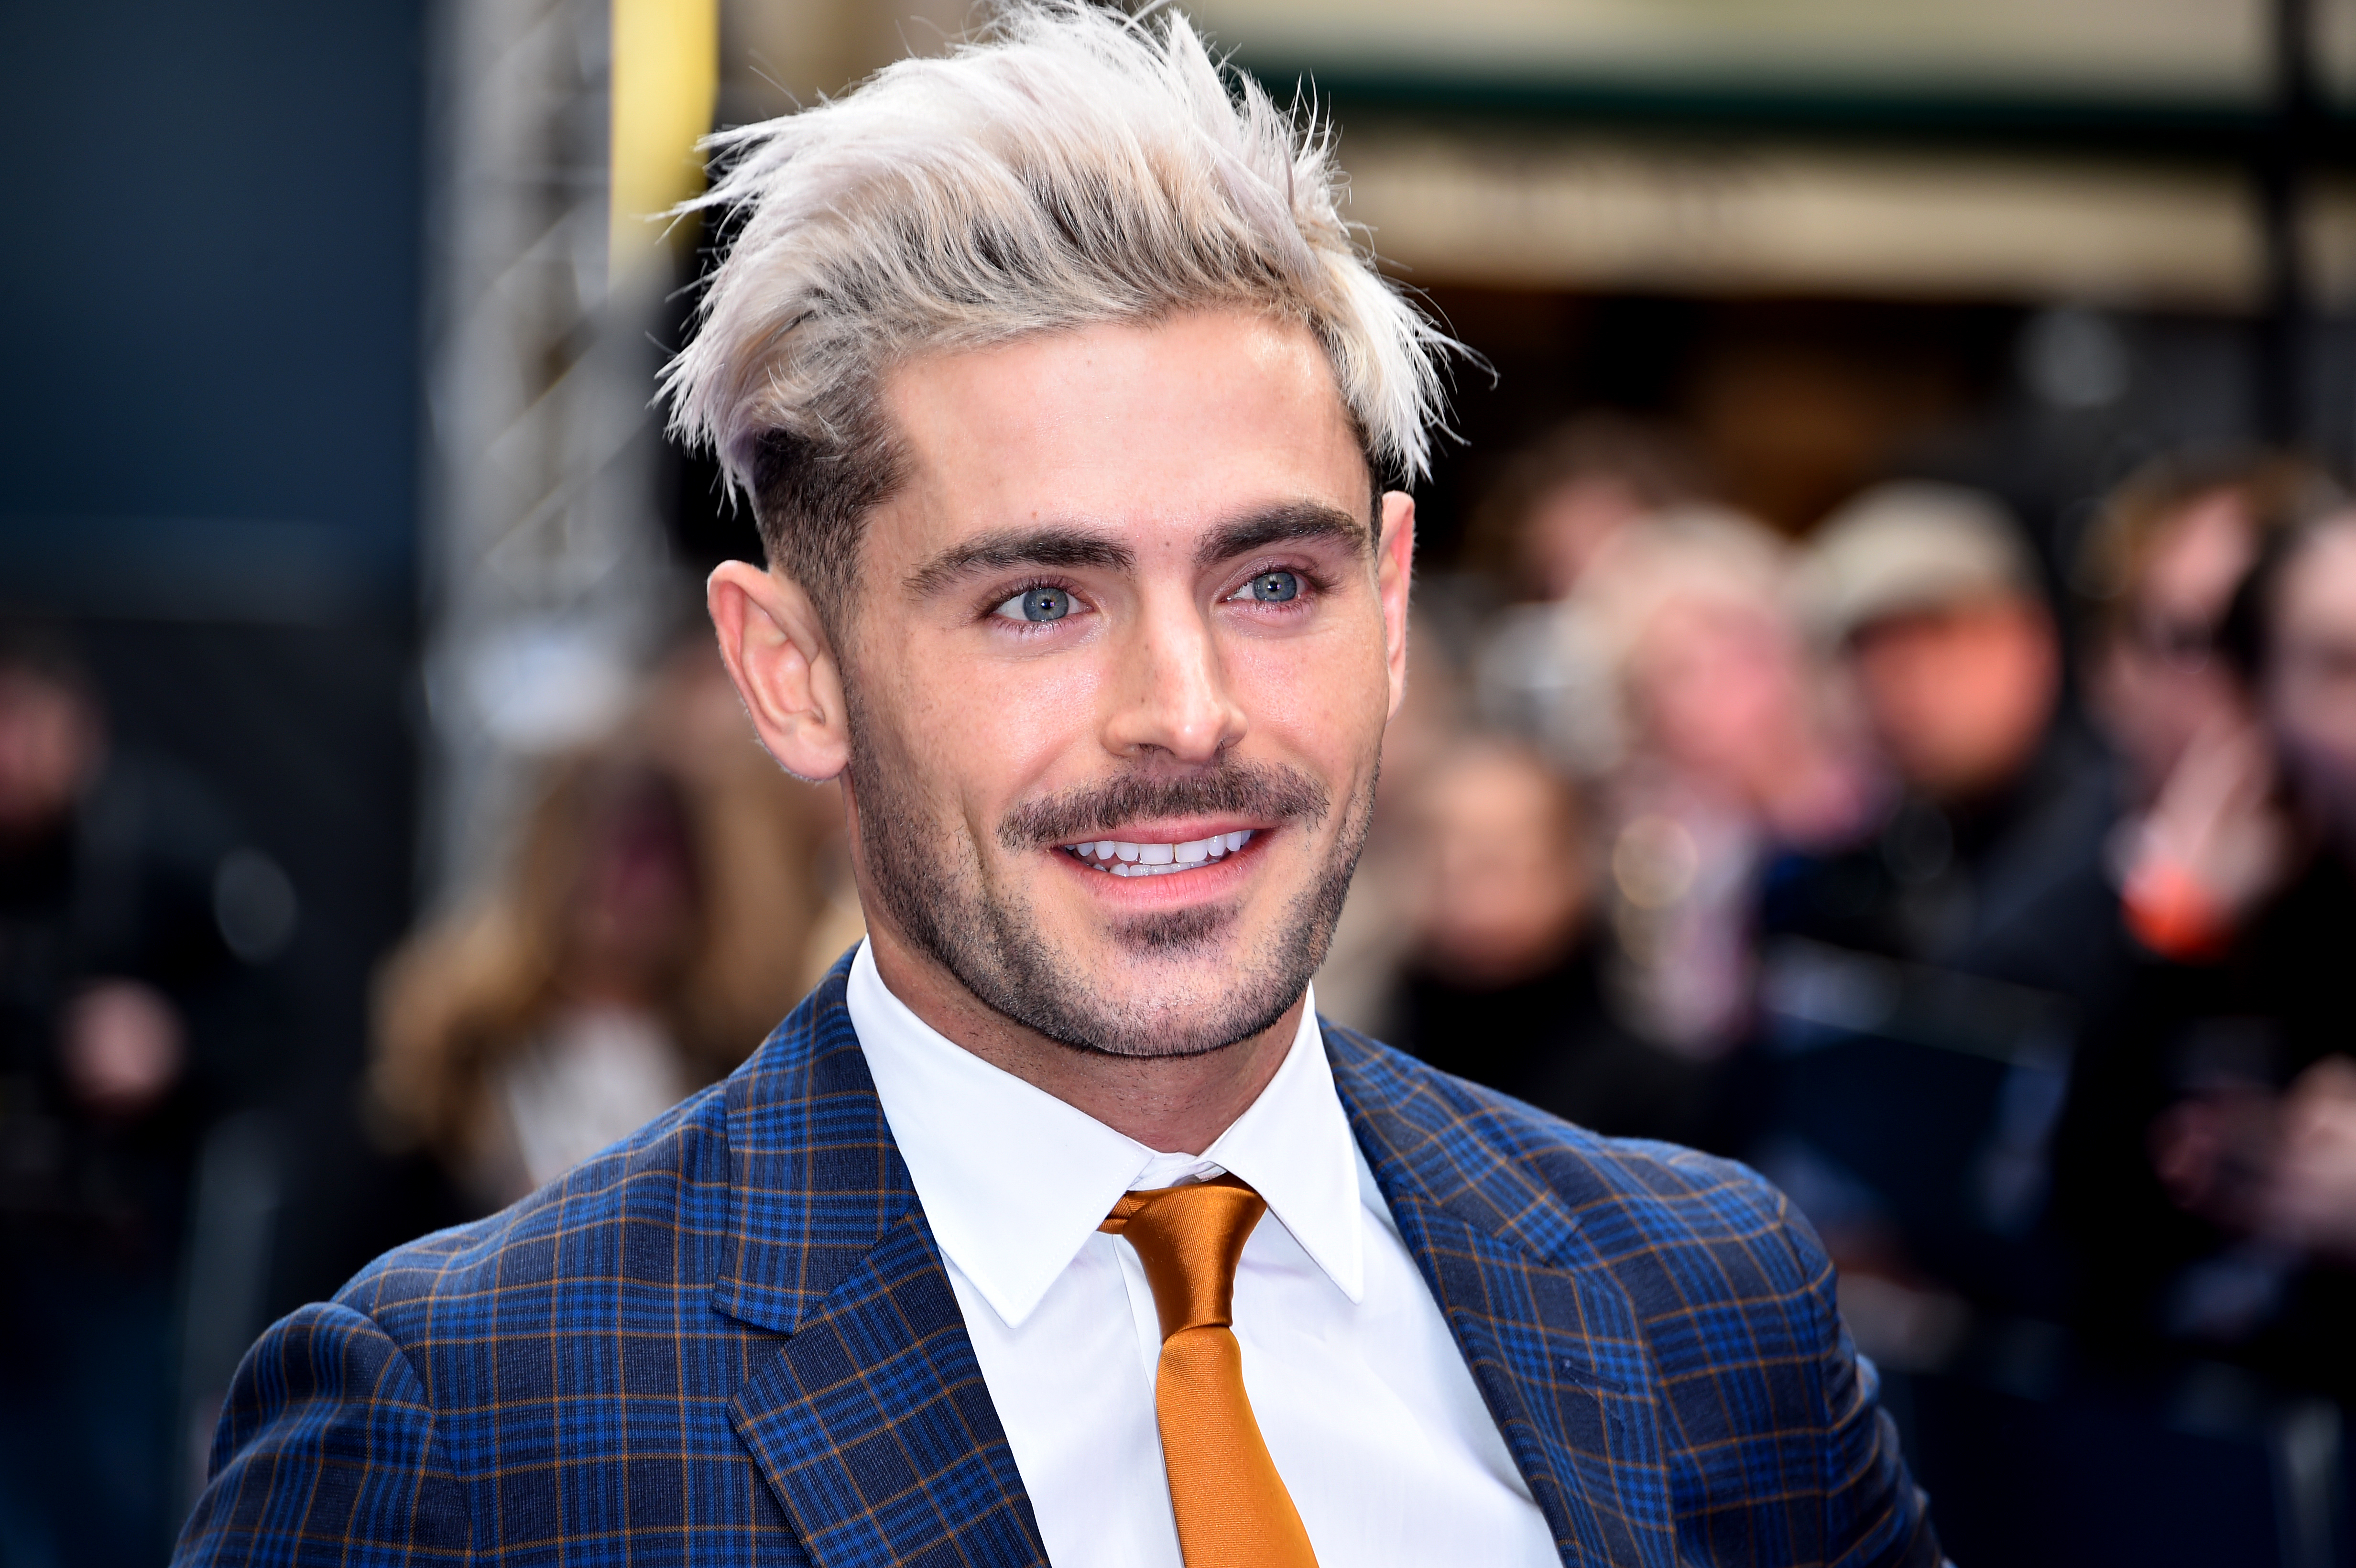 Zac Efron Drags Hollywood As Being The Opposite Place To Live A ‘Happy, Mentally-Sound Life’